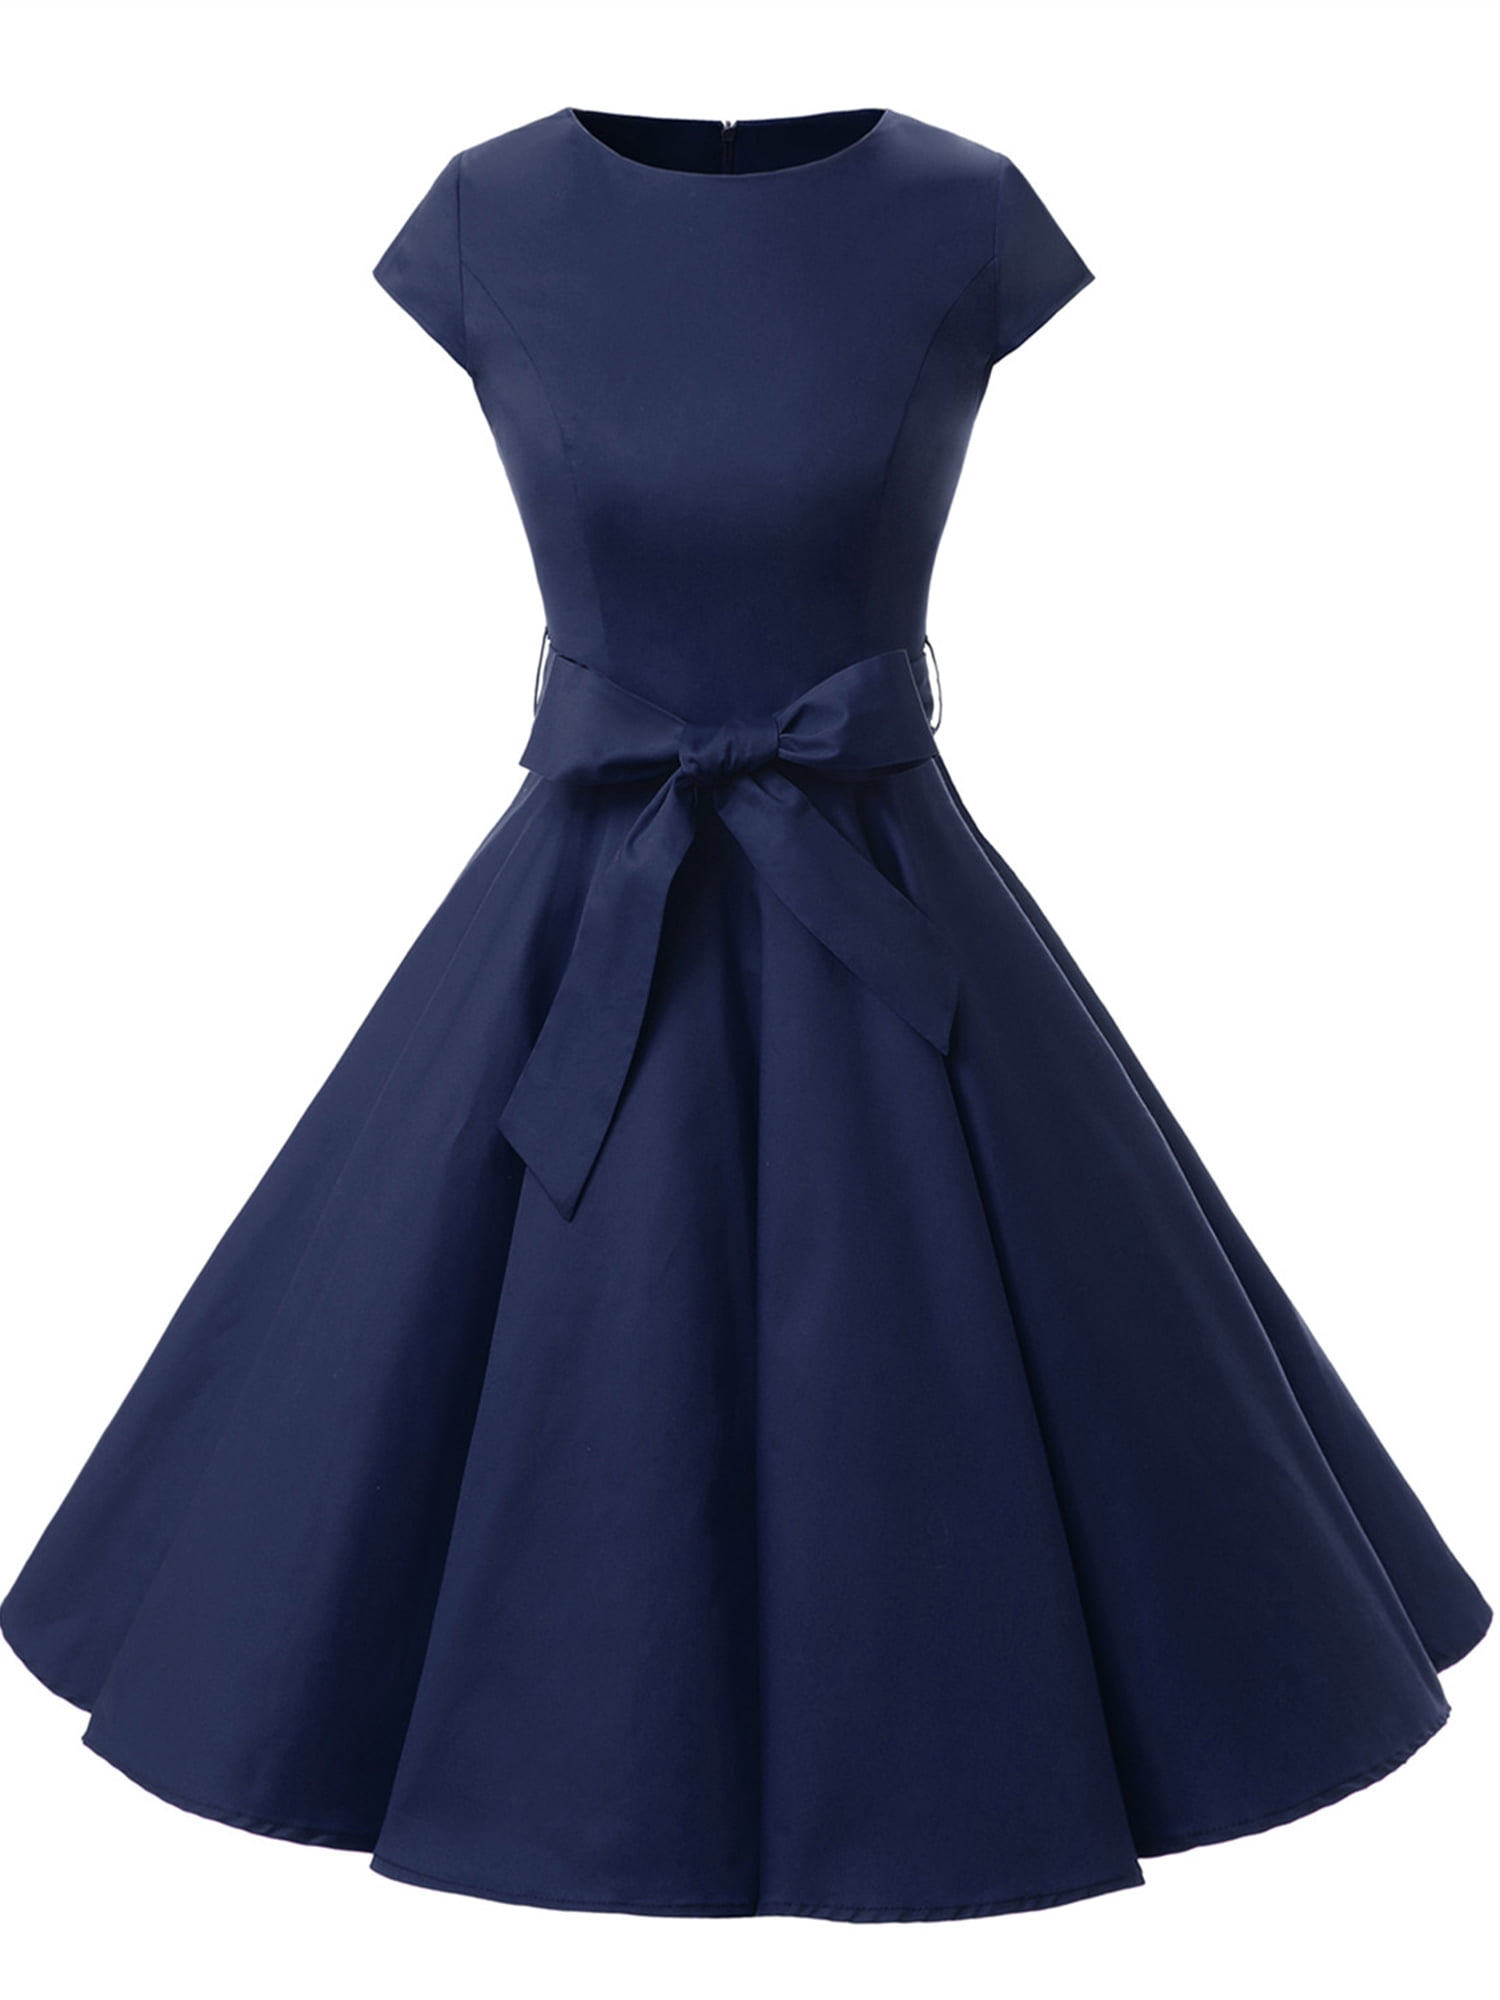 1950s Vintage Hepburn Cocktail Party Tea Dress with Ruffle Cap-Sleeves Solid Midi Dress RAINED-Women Swing A line Dress